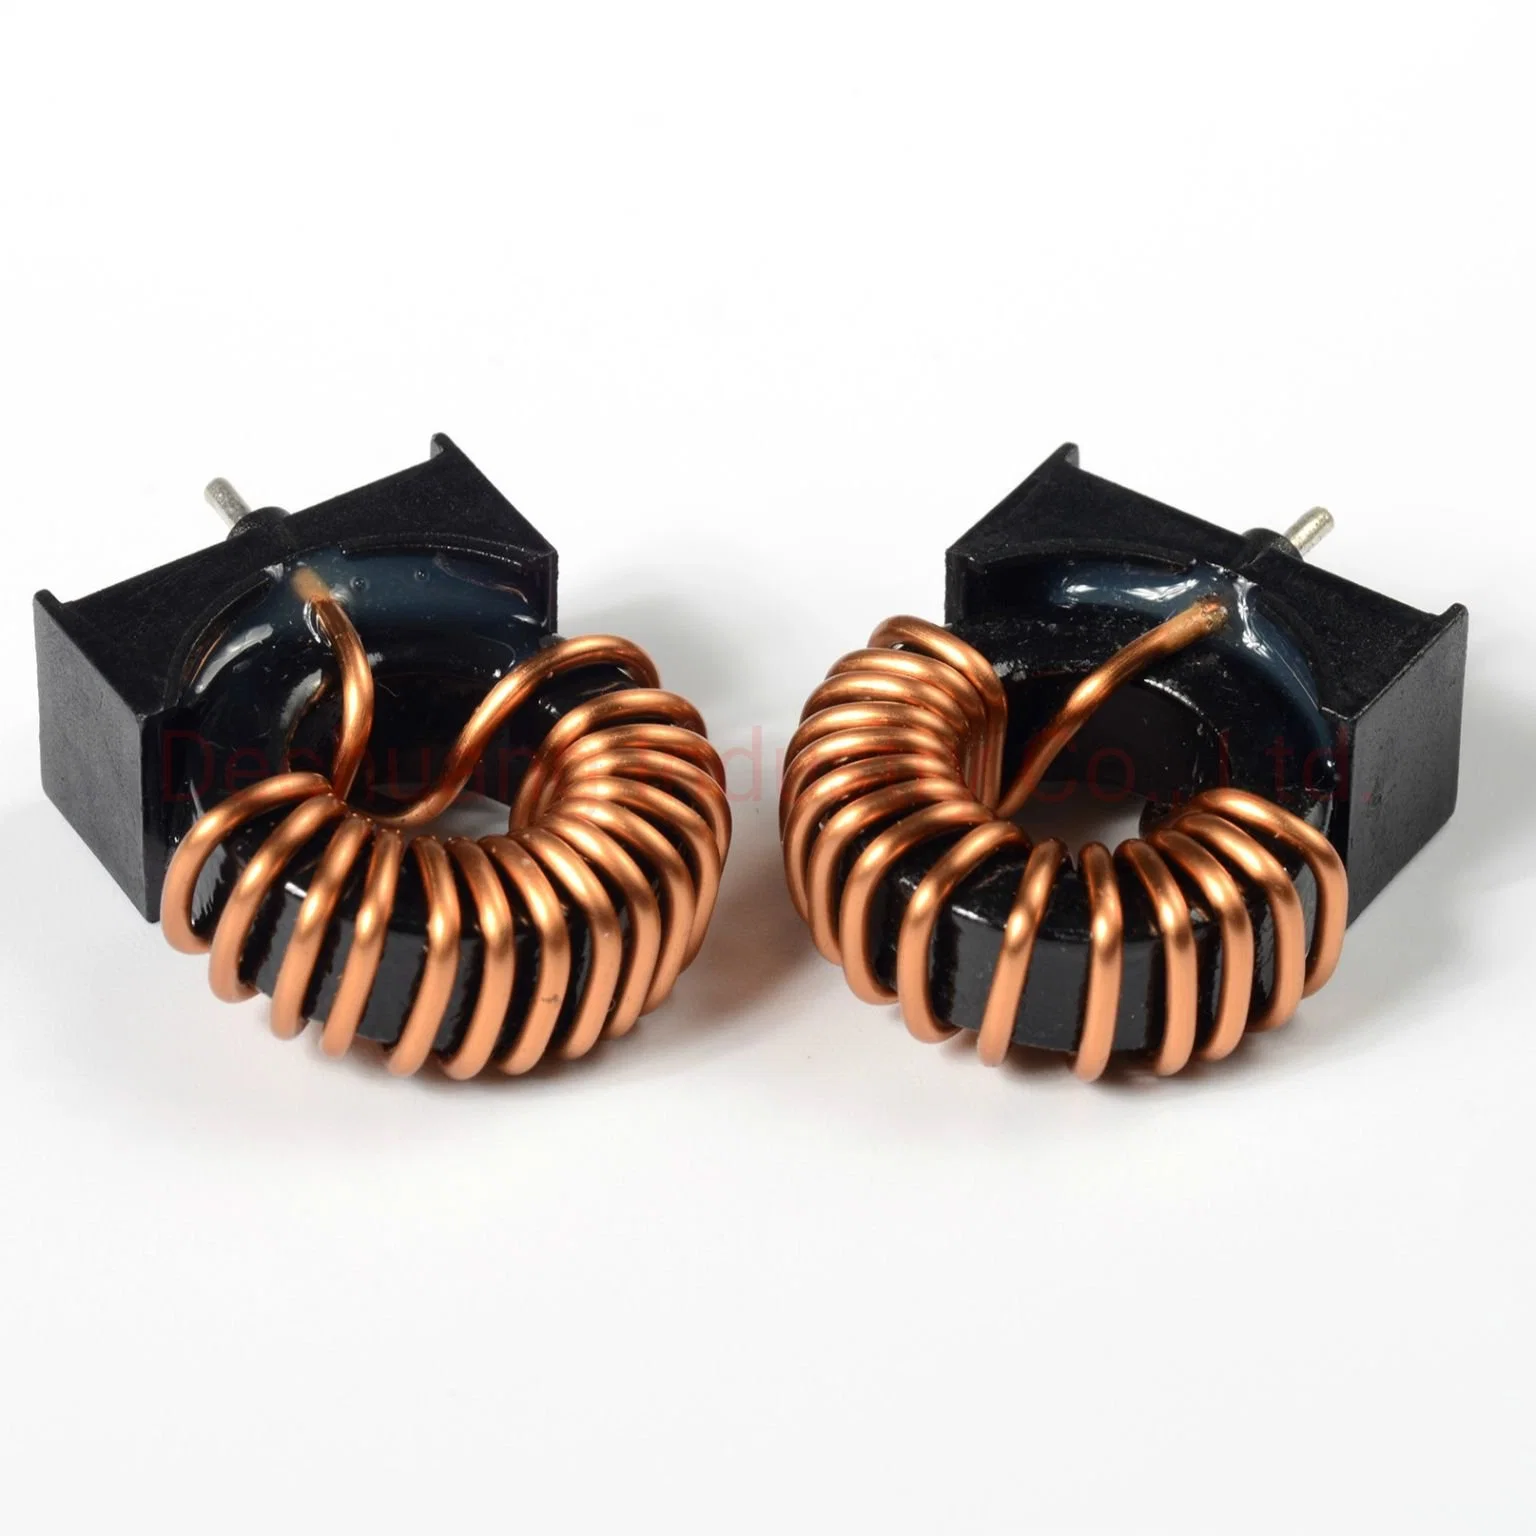 China High quality/High cost performance  High Current Toroidal Core Inductor 20mh 25mh 30mh 50mh Common Mode Line Chokes Copper Coil with Base for PCBA Switching Power Supplies